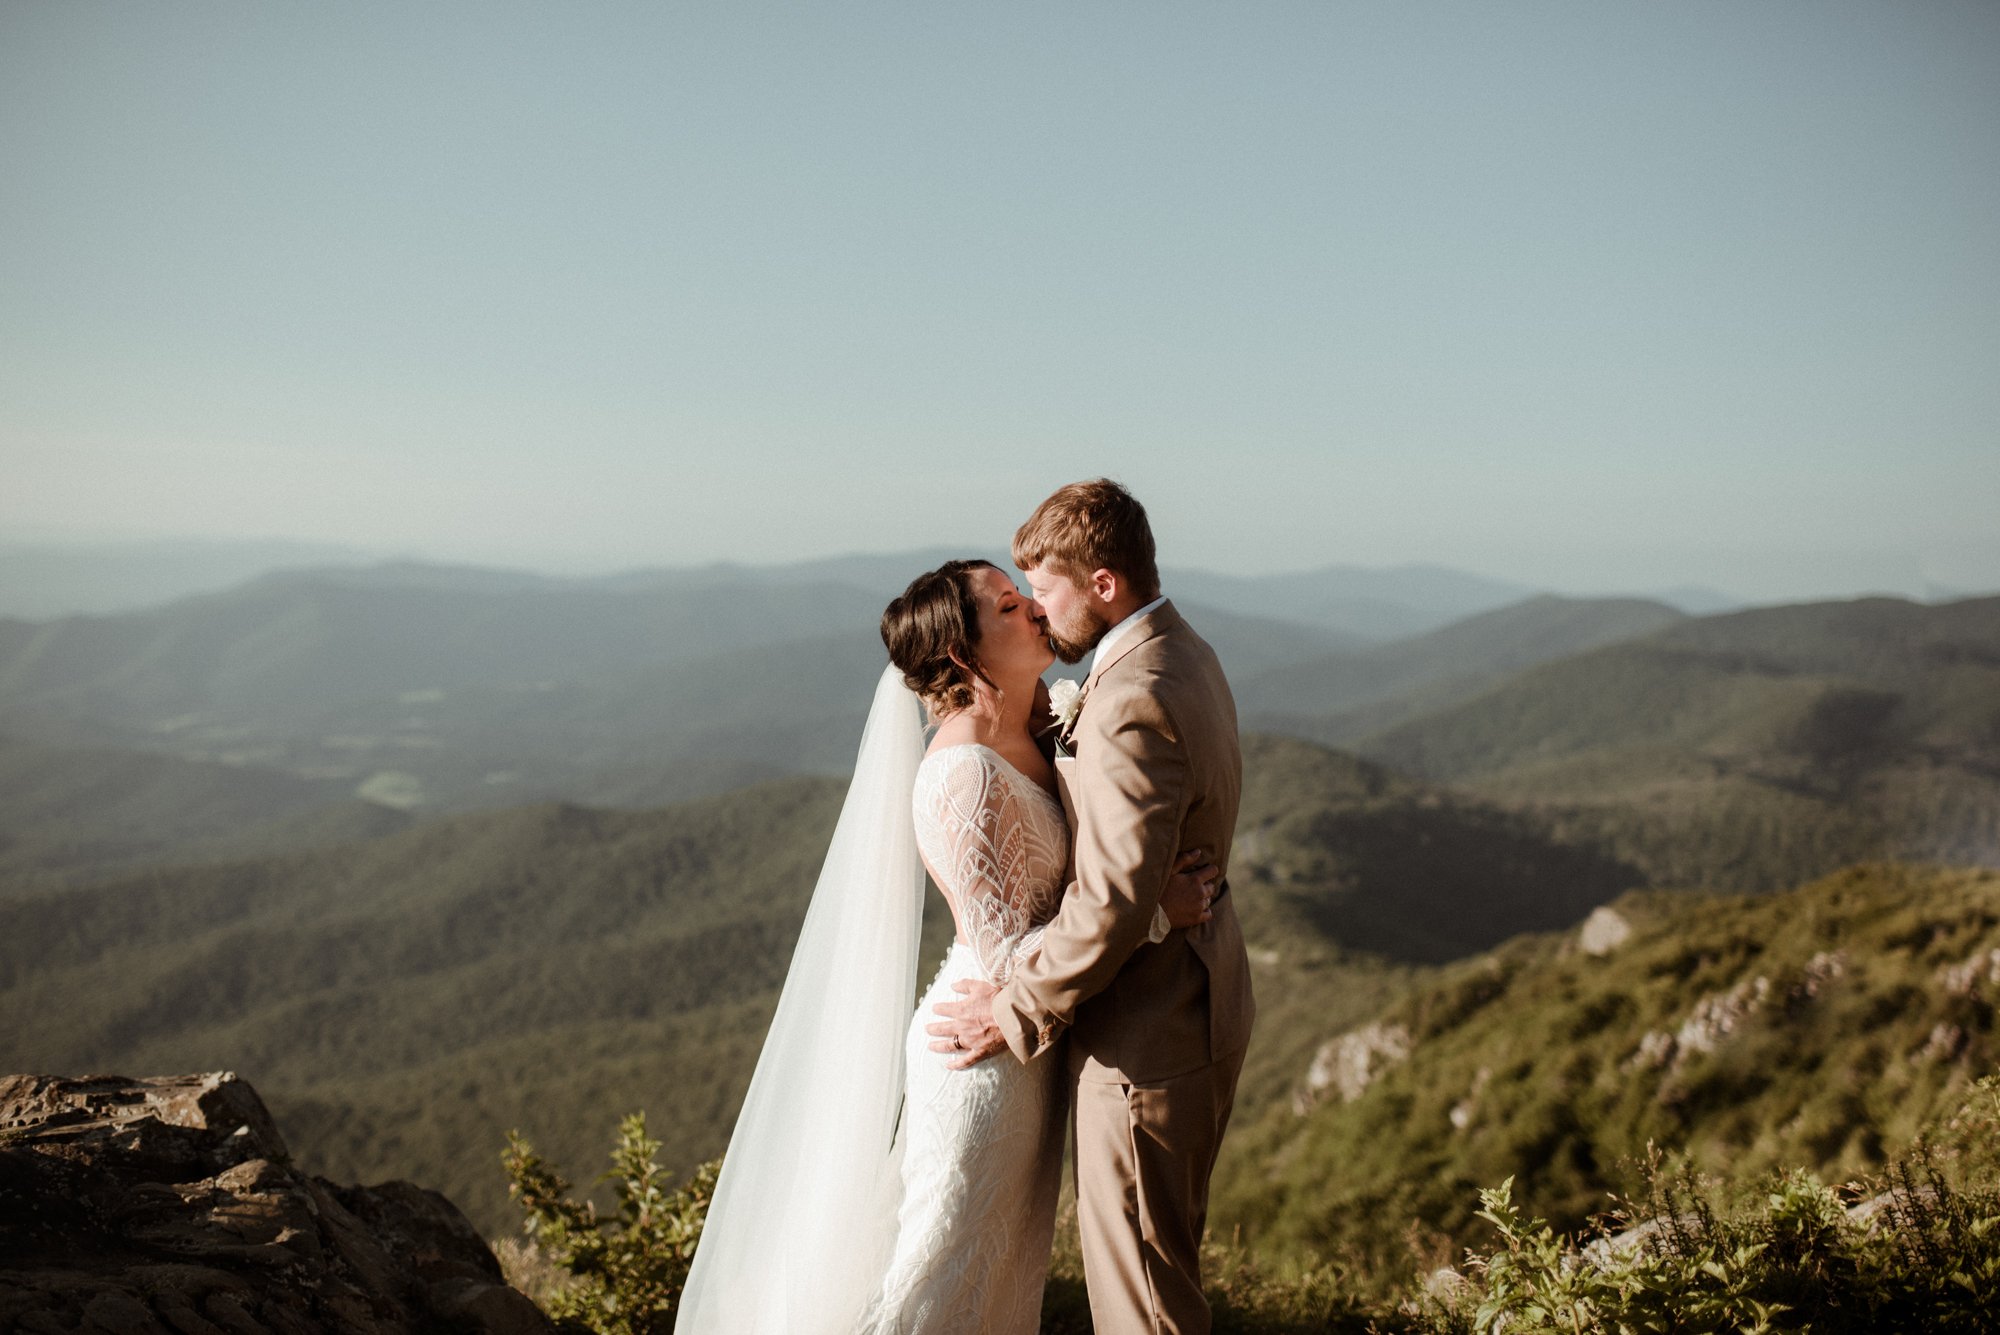 Sunset Elopement on Stony Man Summit in Shenandoah National Park - White Sails Creative Elopement Photography - July Elopement on the Blue Ridge Parkway_34.jpg